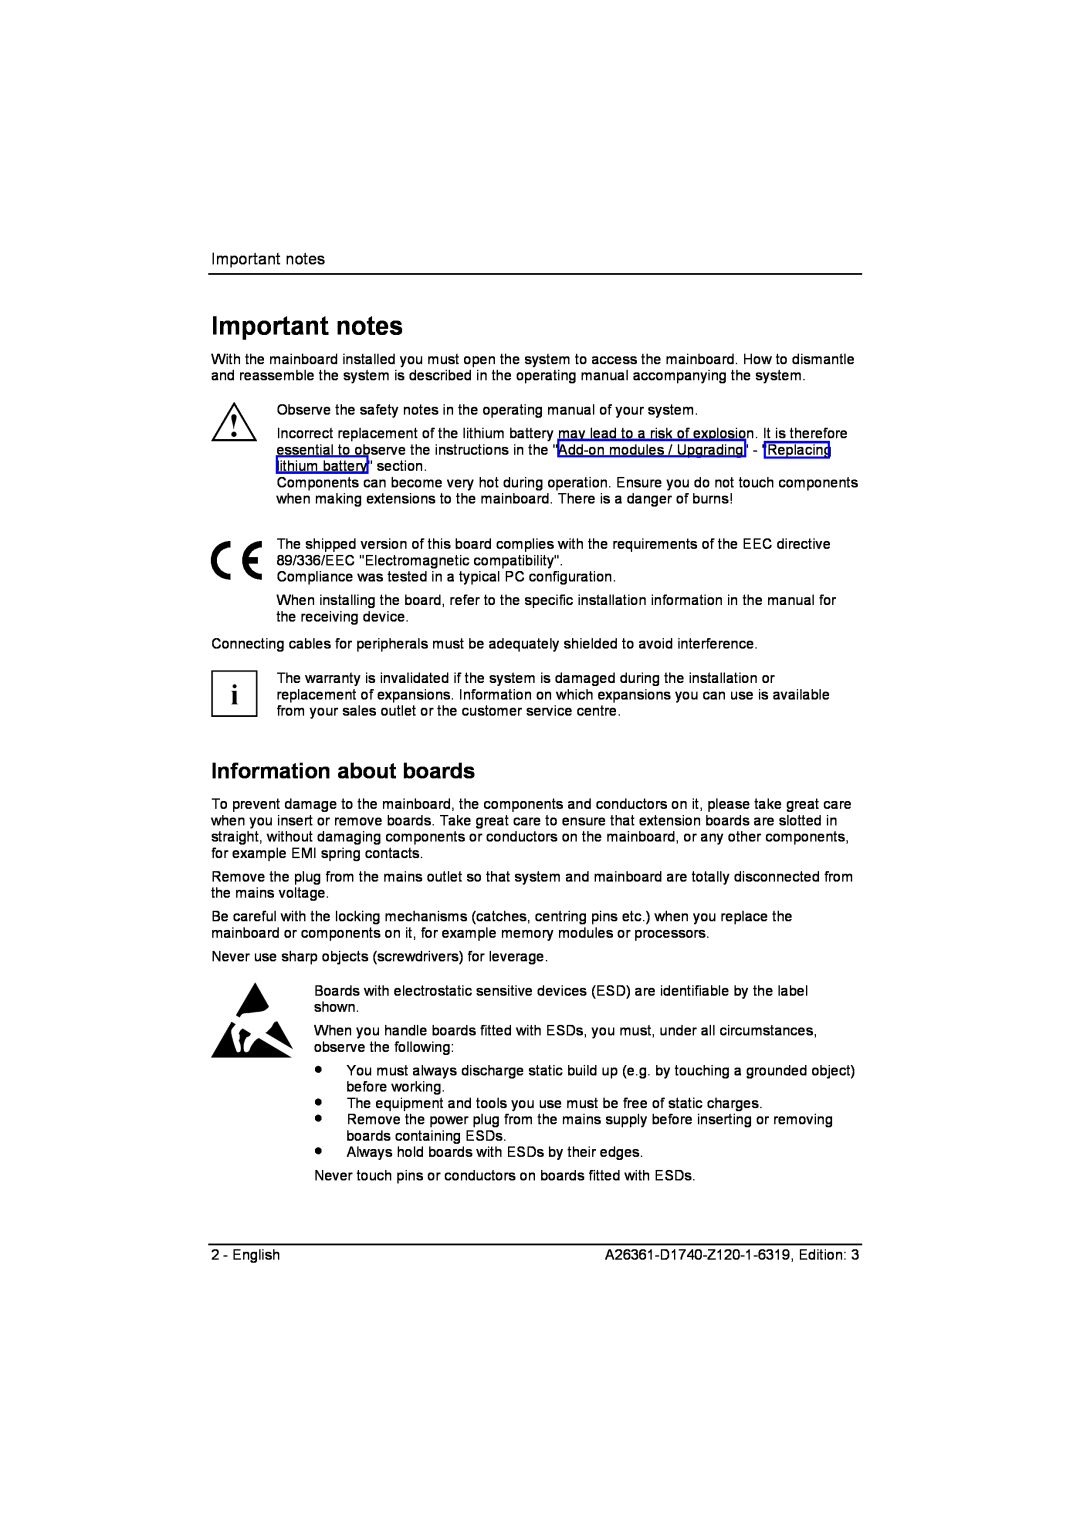 Fujitsu D1740 technical manual Important notes, Information about boards 